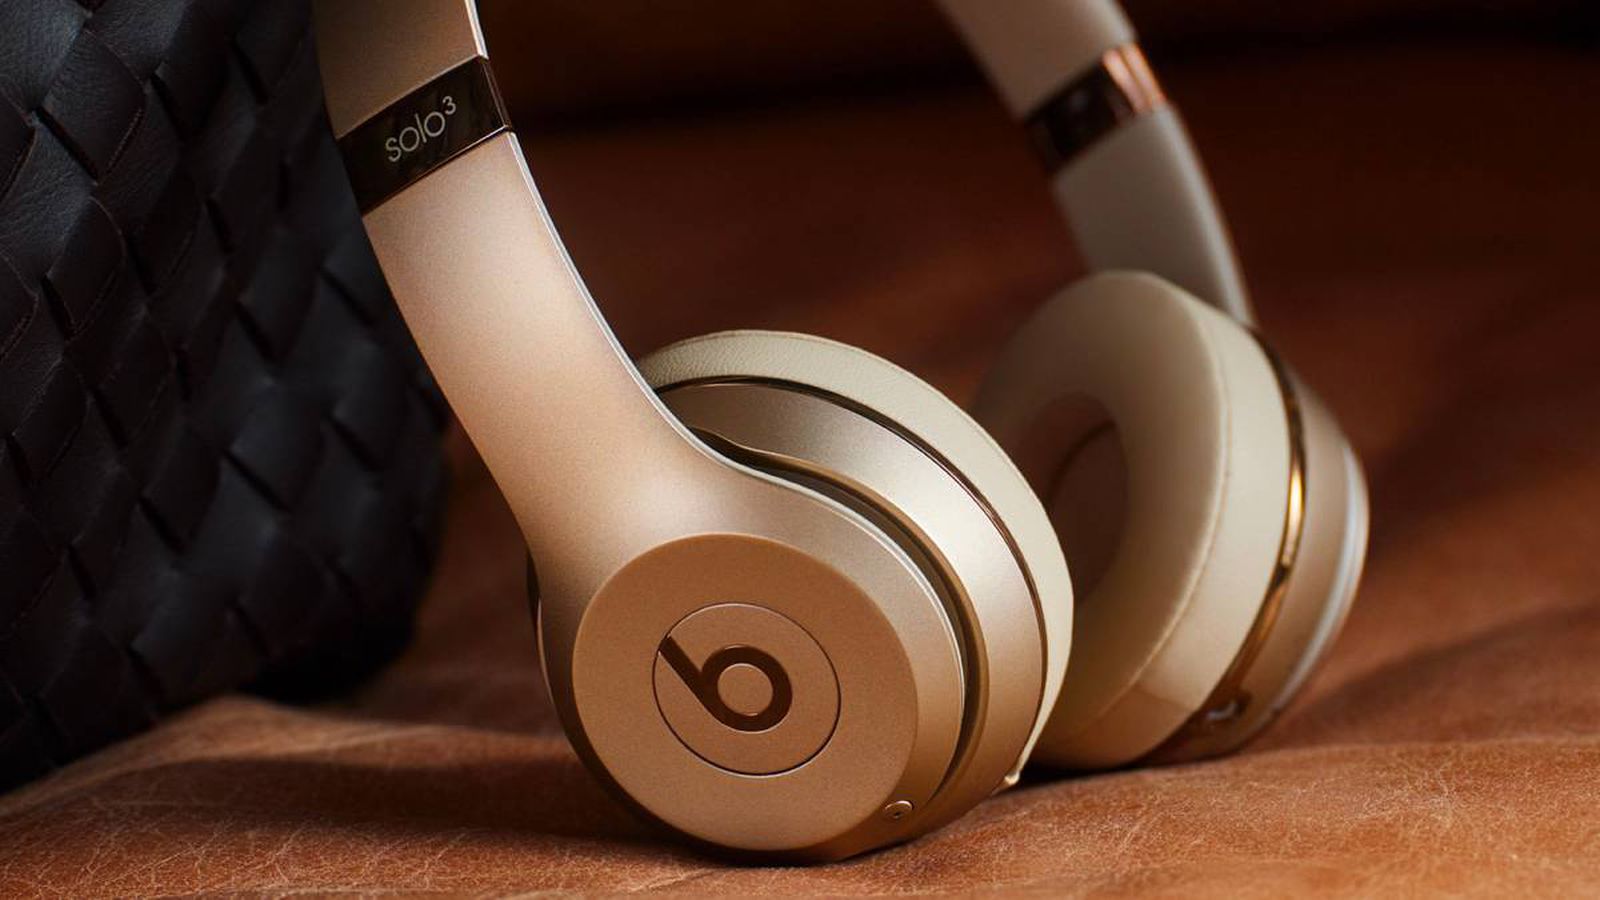 Apple's Old Beats Solo3 Headphones Available in Gold and